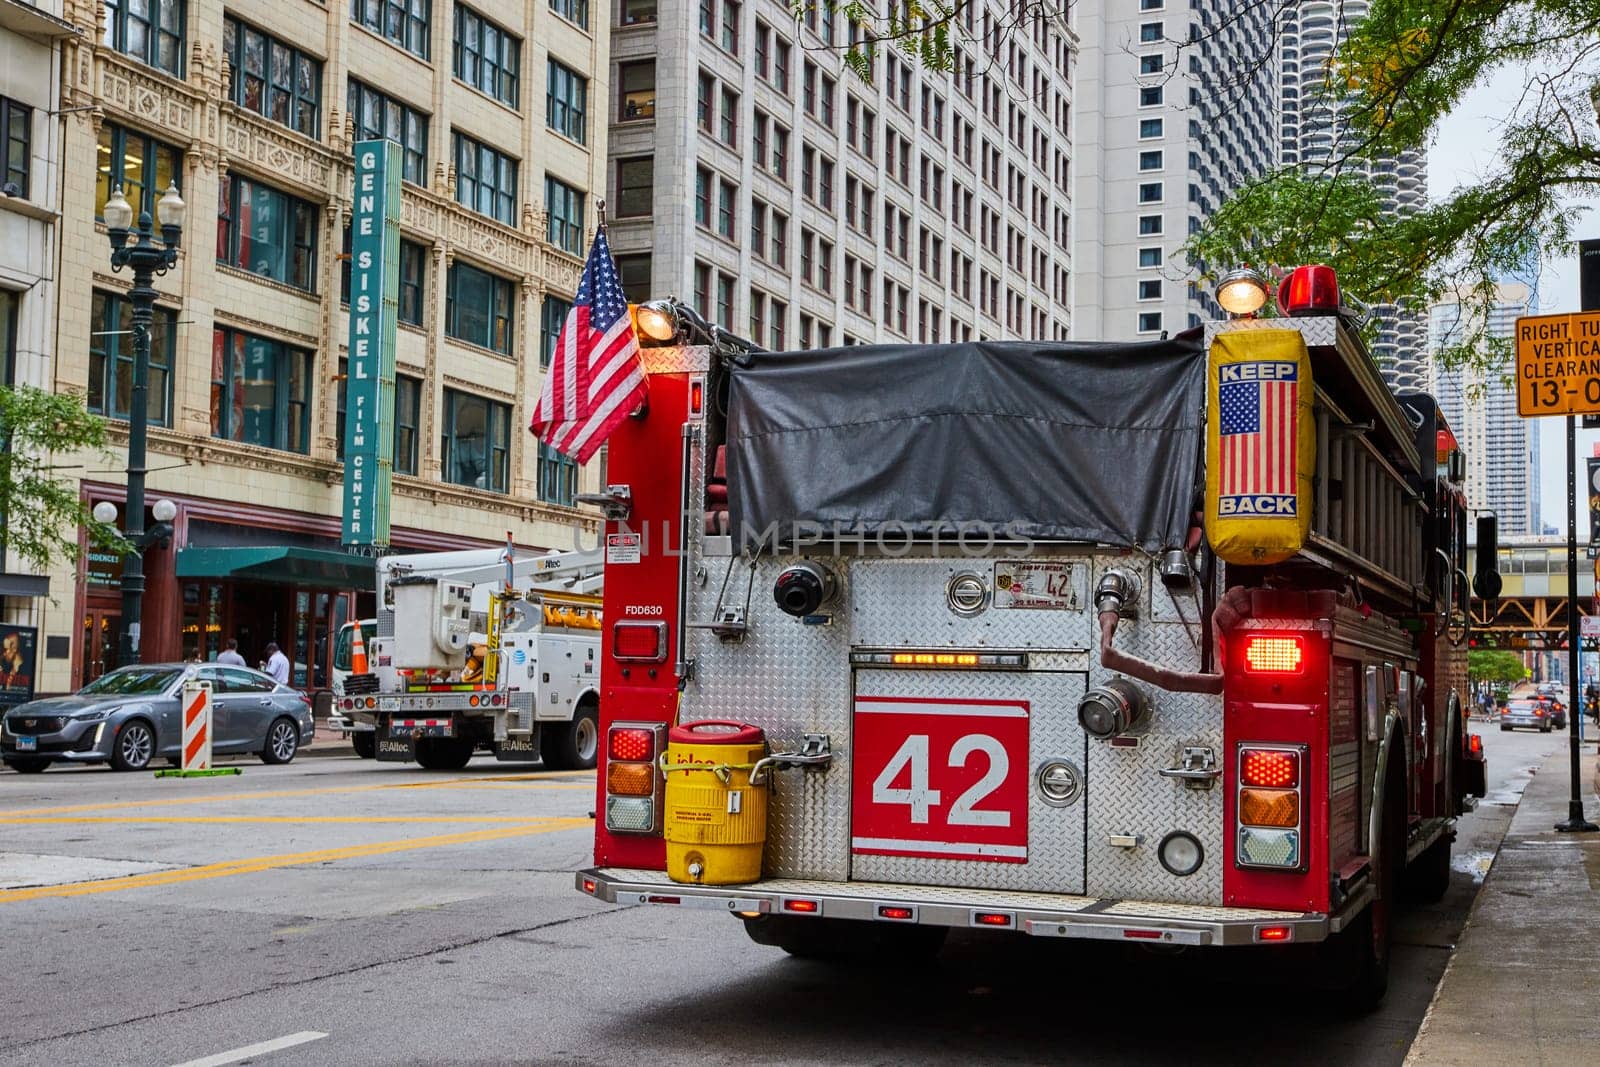 Fire truck rear, fire safety and American flag on engine number 42, the meaning of life, Chicago, IL by njproductions